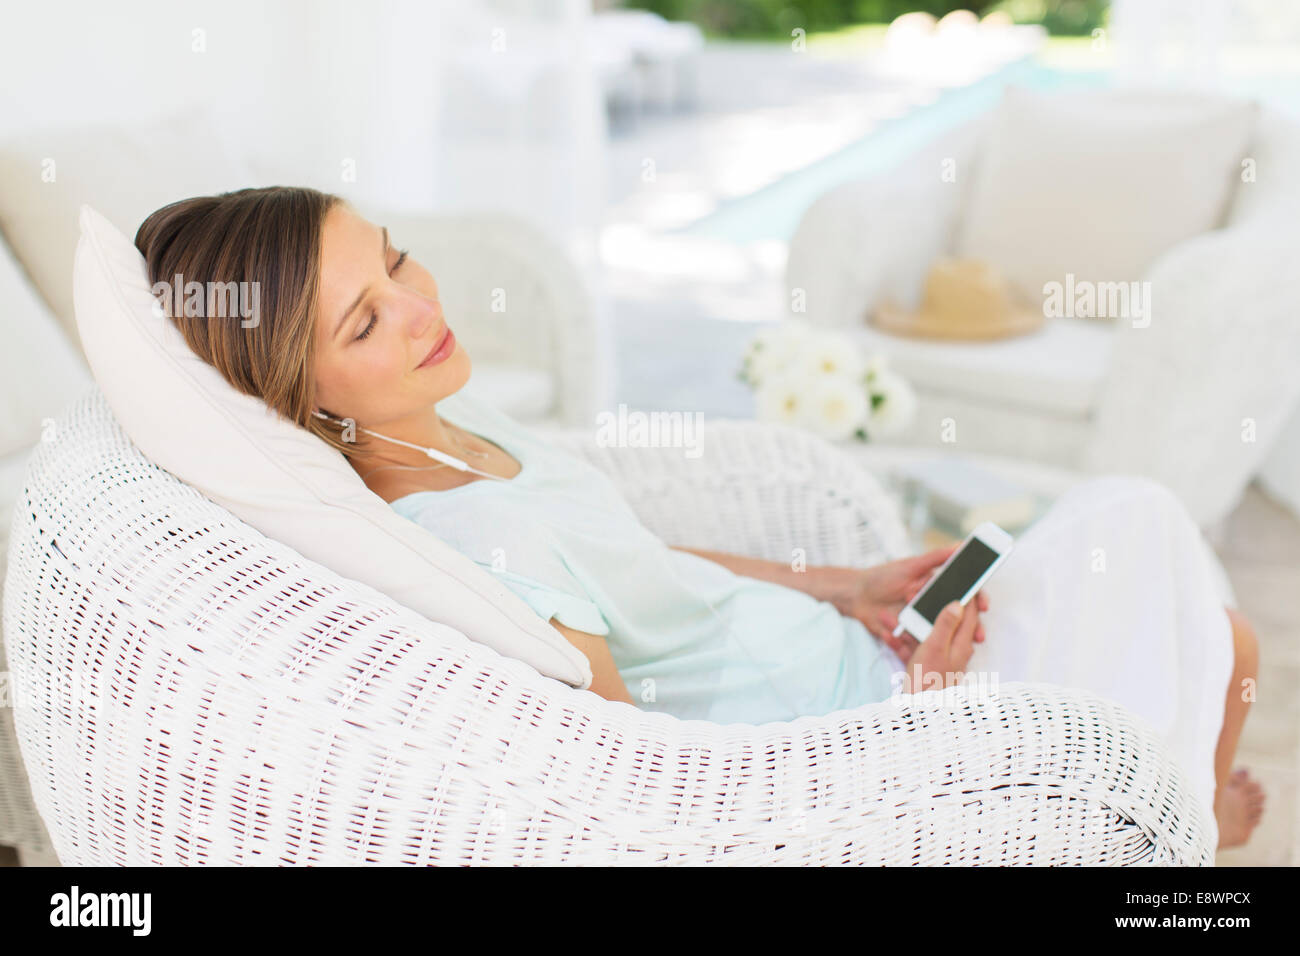 Woman listening to music in wicker chair Stock Photo